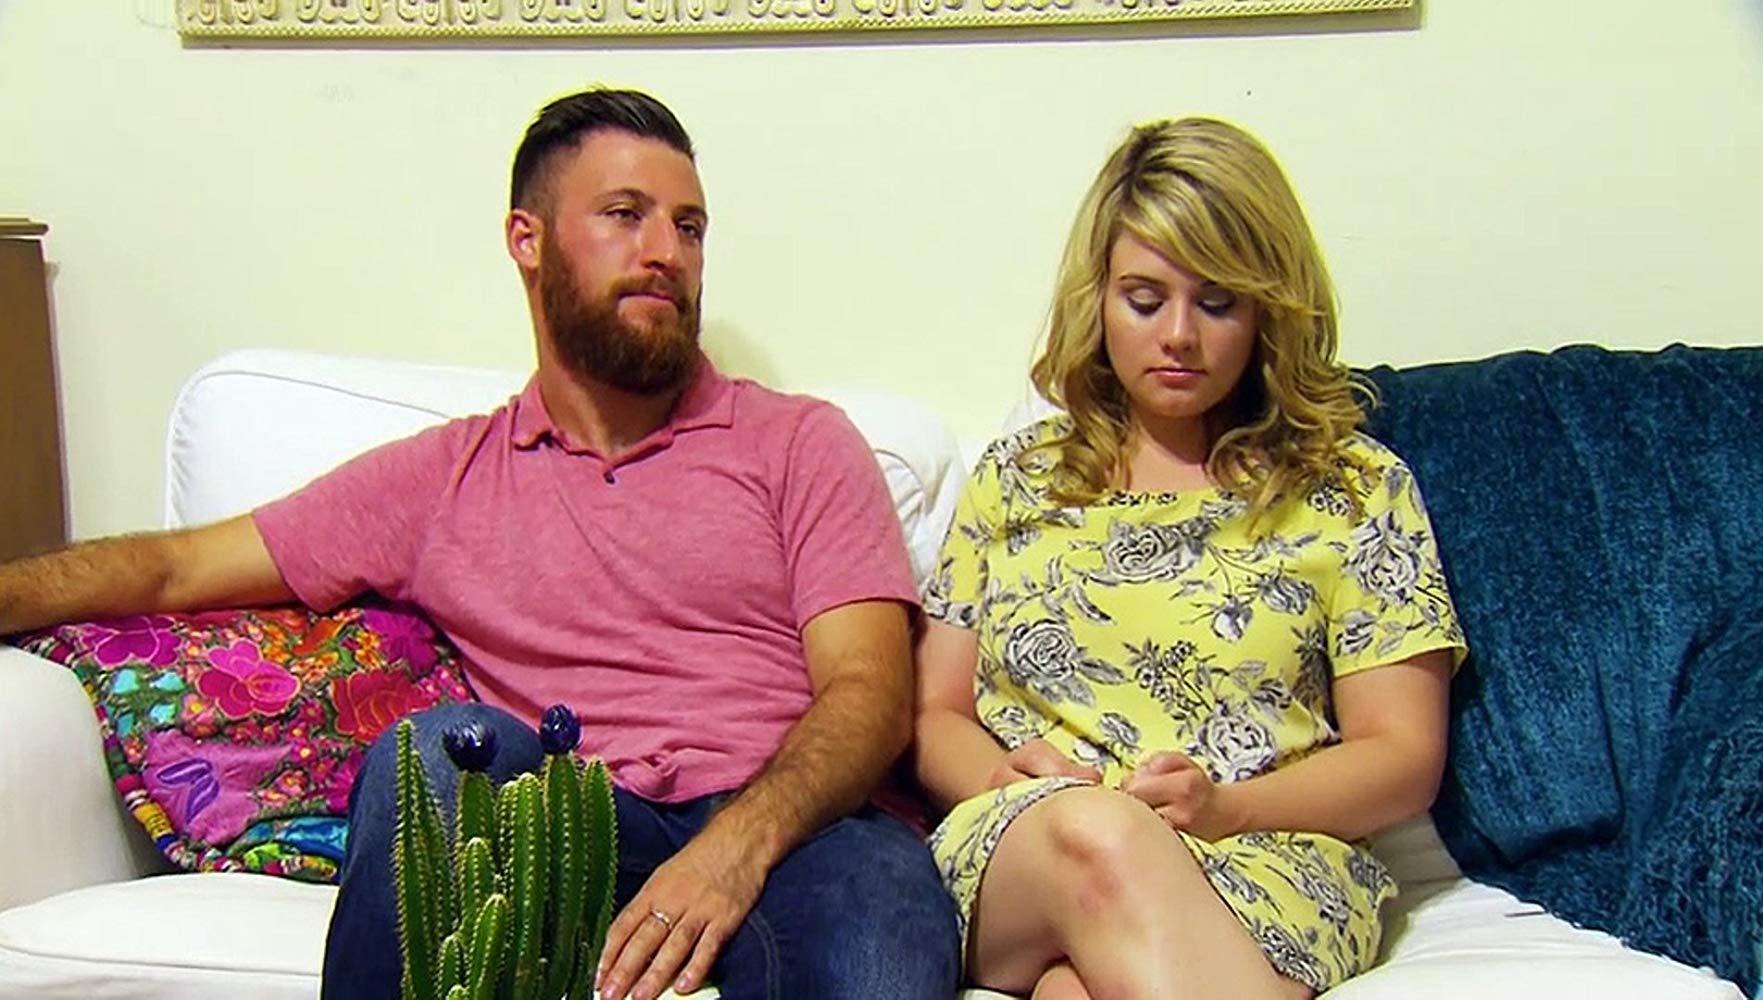 Married At First Sight AU - Season 8